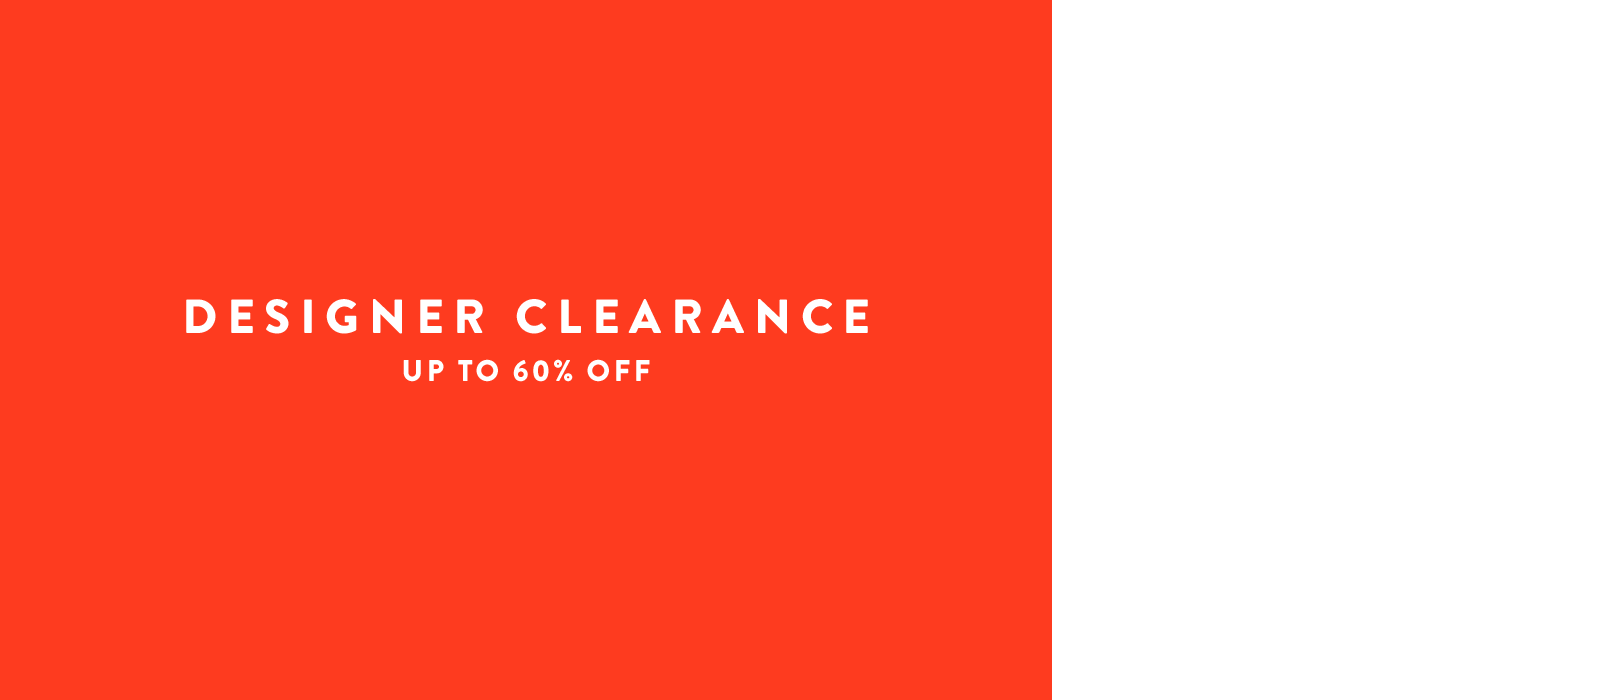 Designer clearance: up to 60% off.